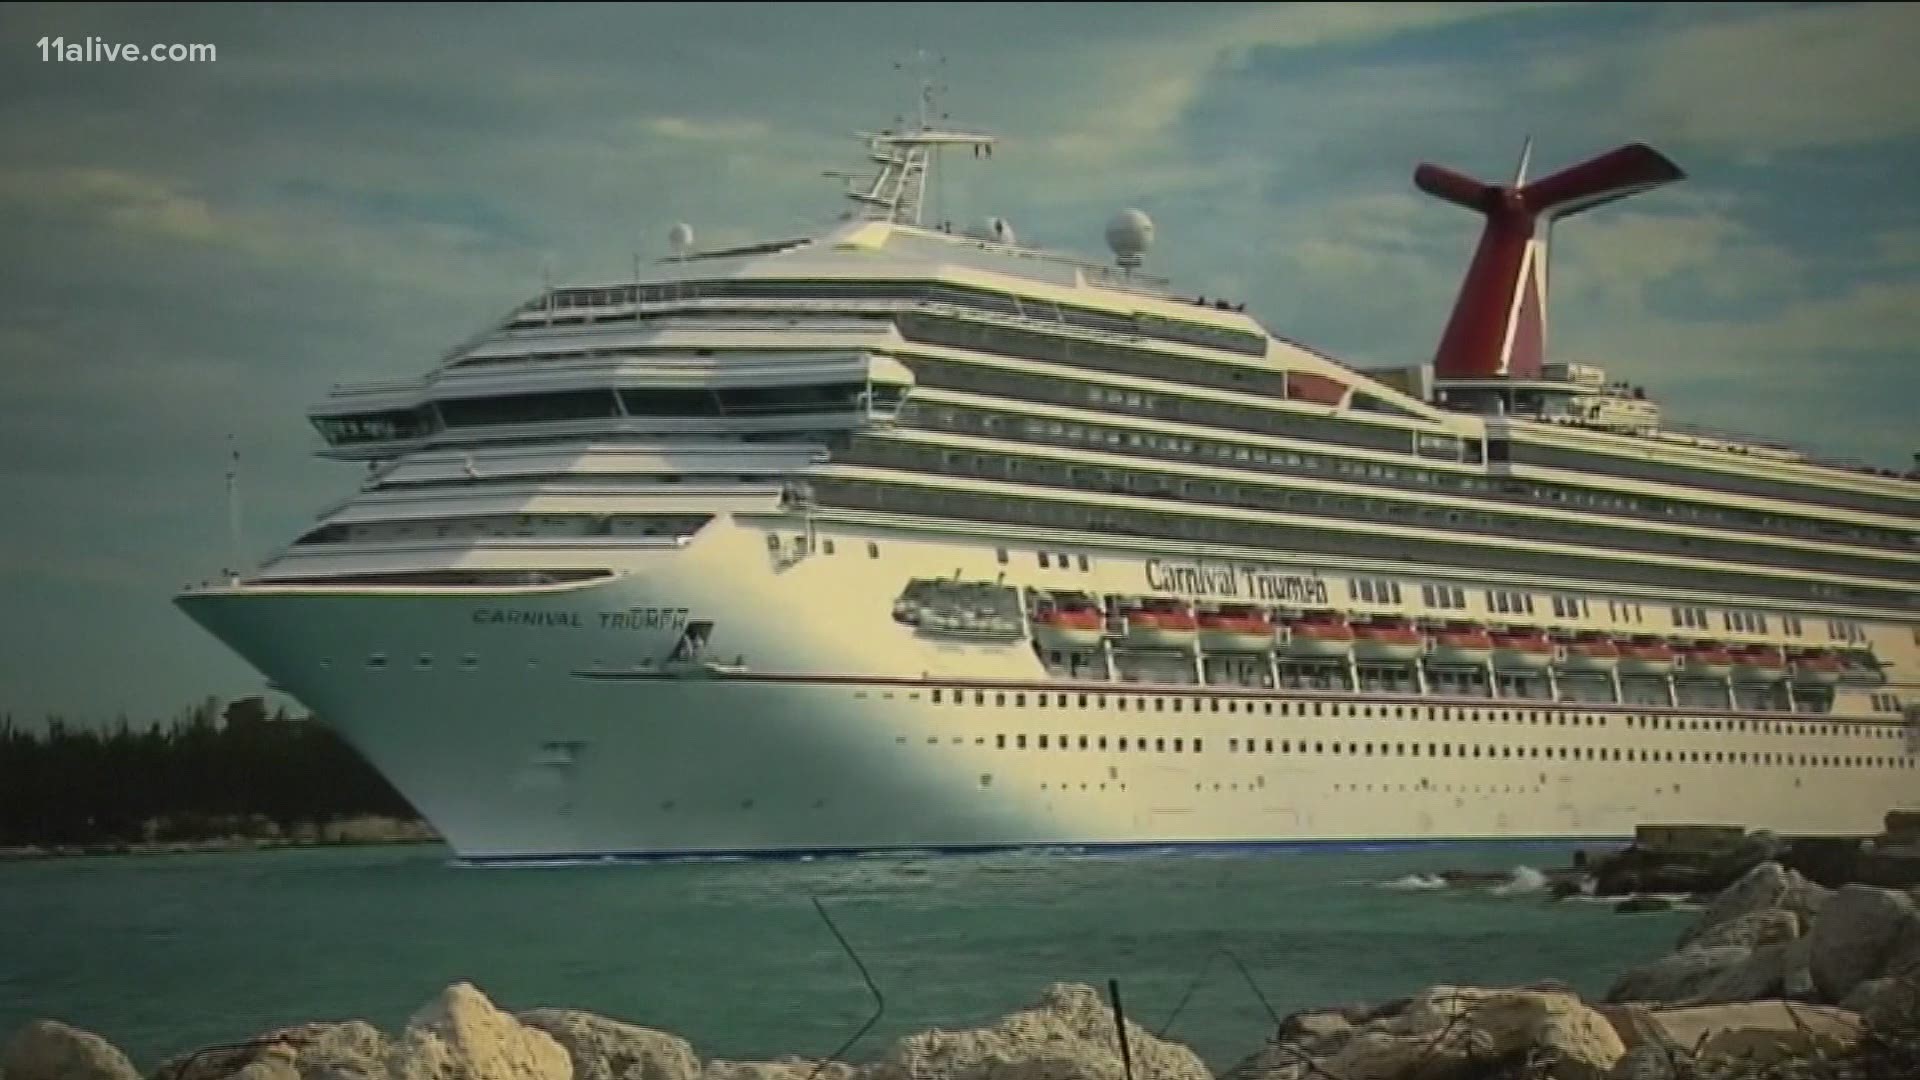 The cruise line also announced they'd be selling some ships.